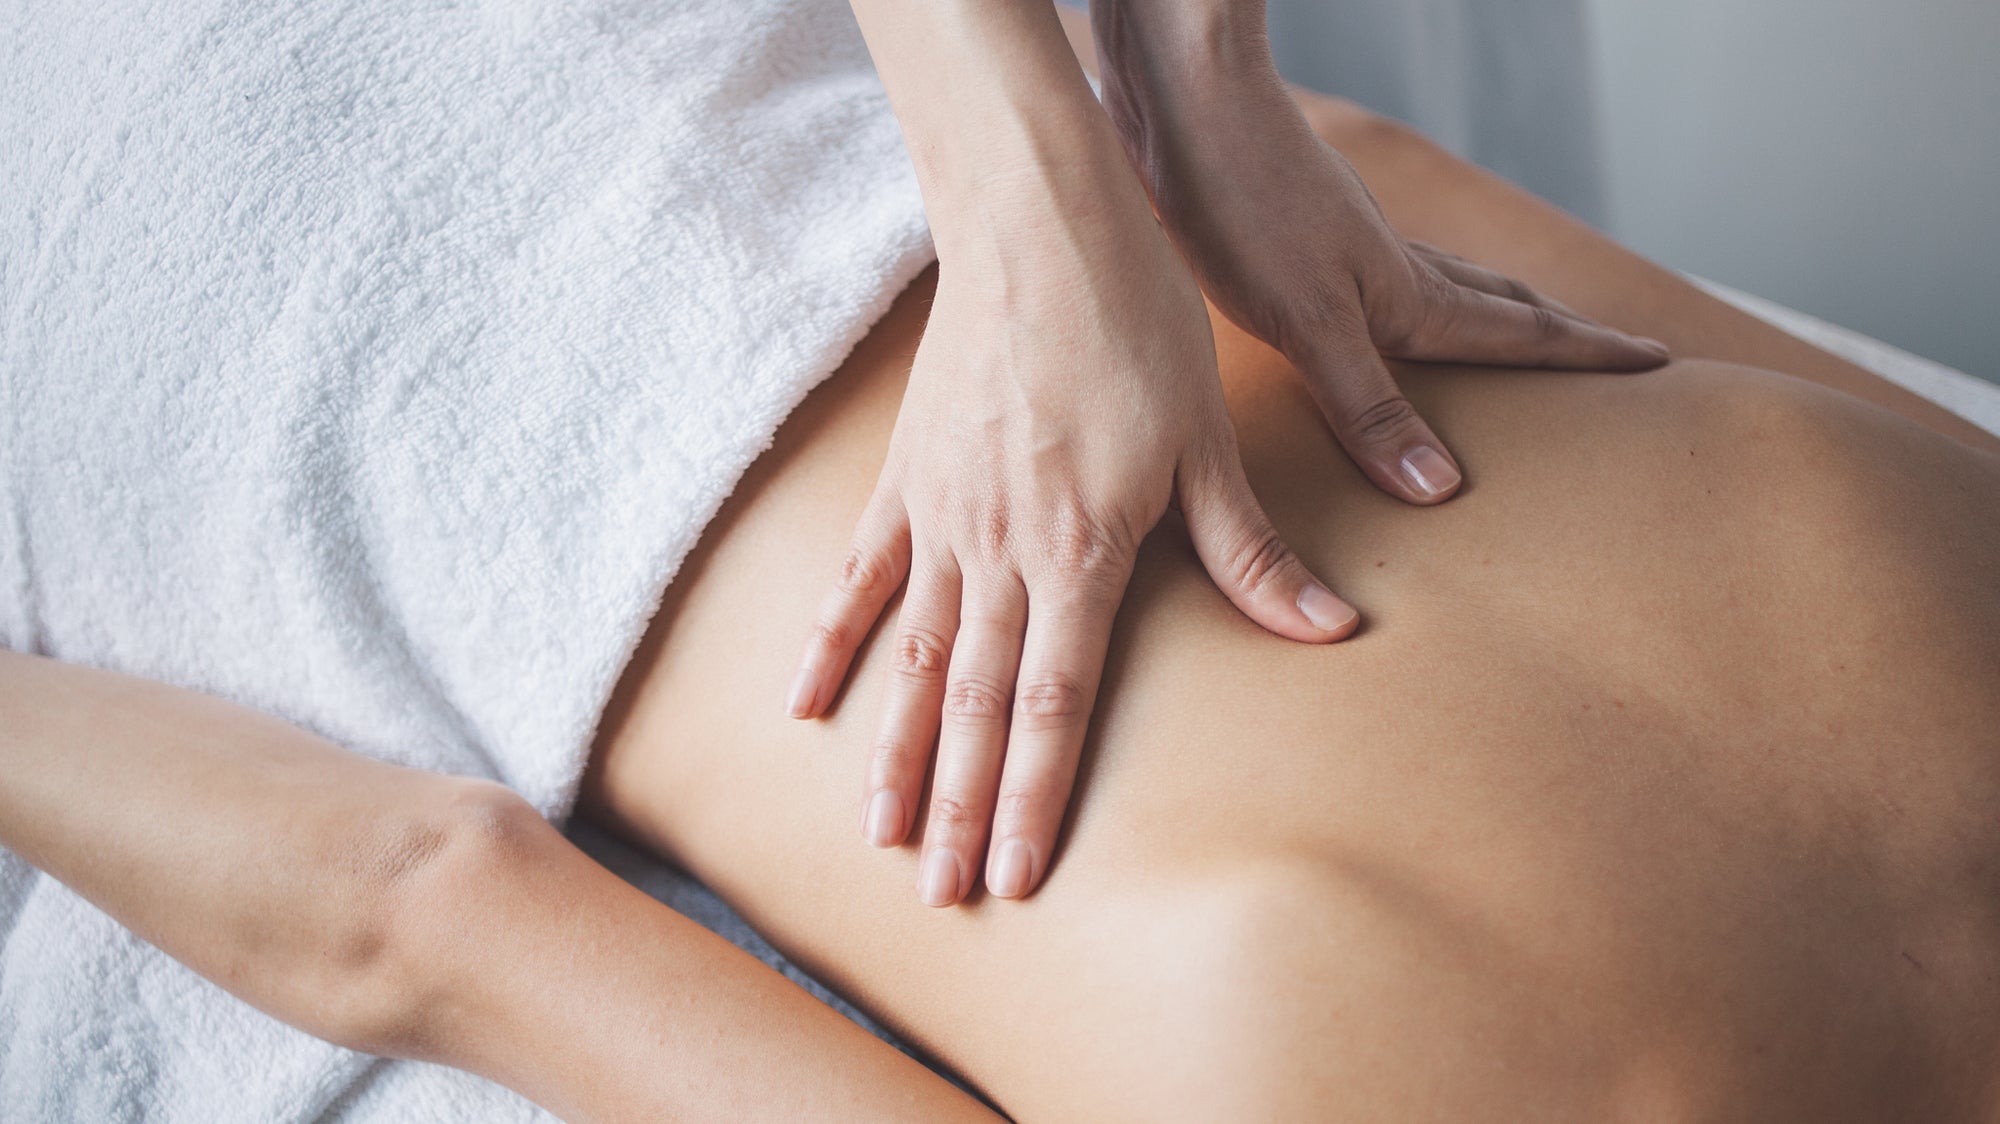 Massage for Back Pain Relief Near You